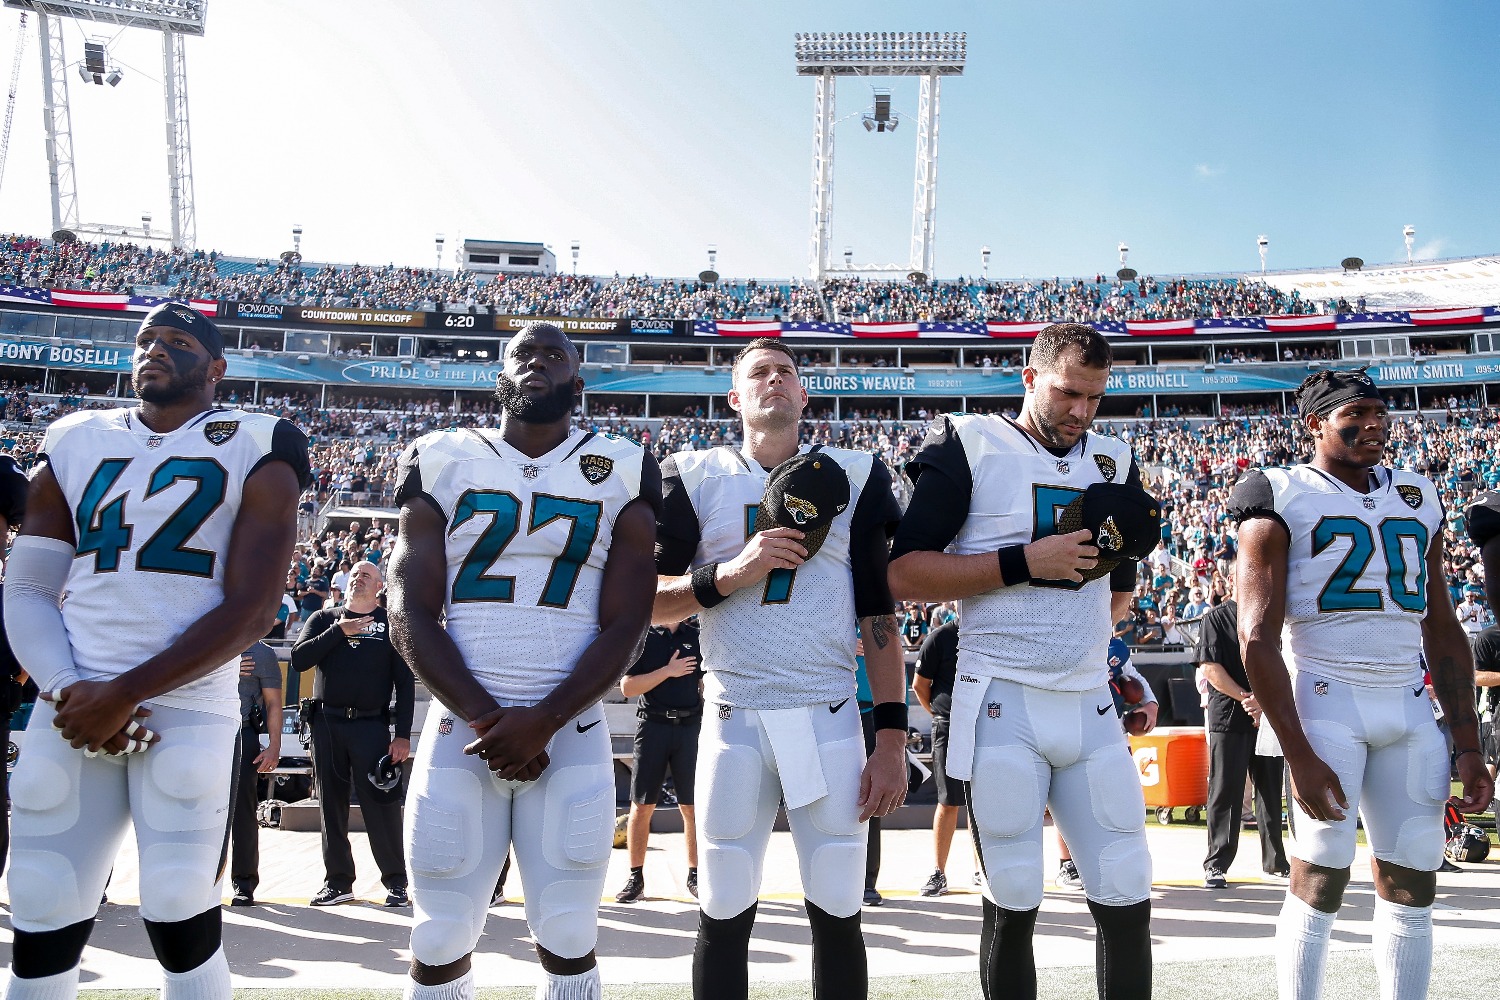 Leonard Fournette's release certifies the Jaguars as the NFL's most embarrassing franchise, especially with their blown NFL draft picks.